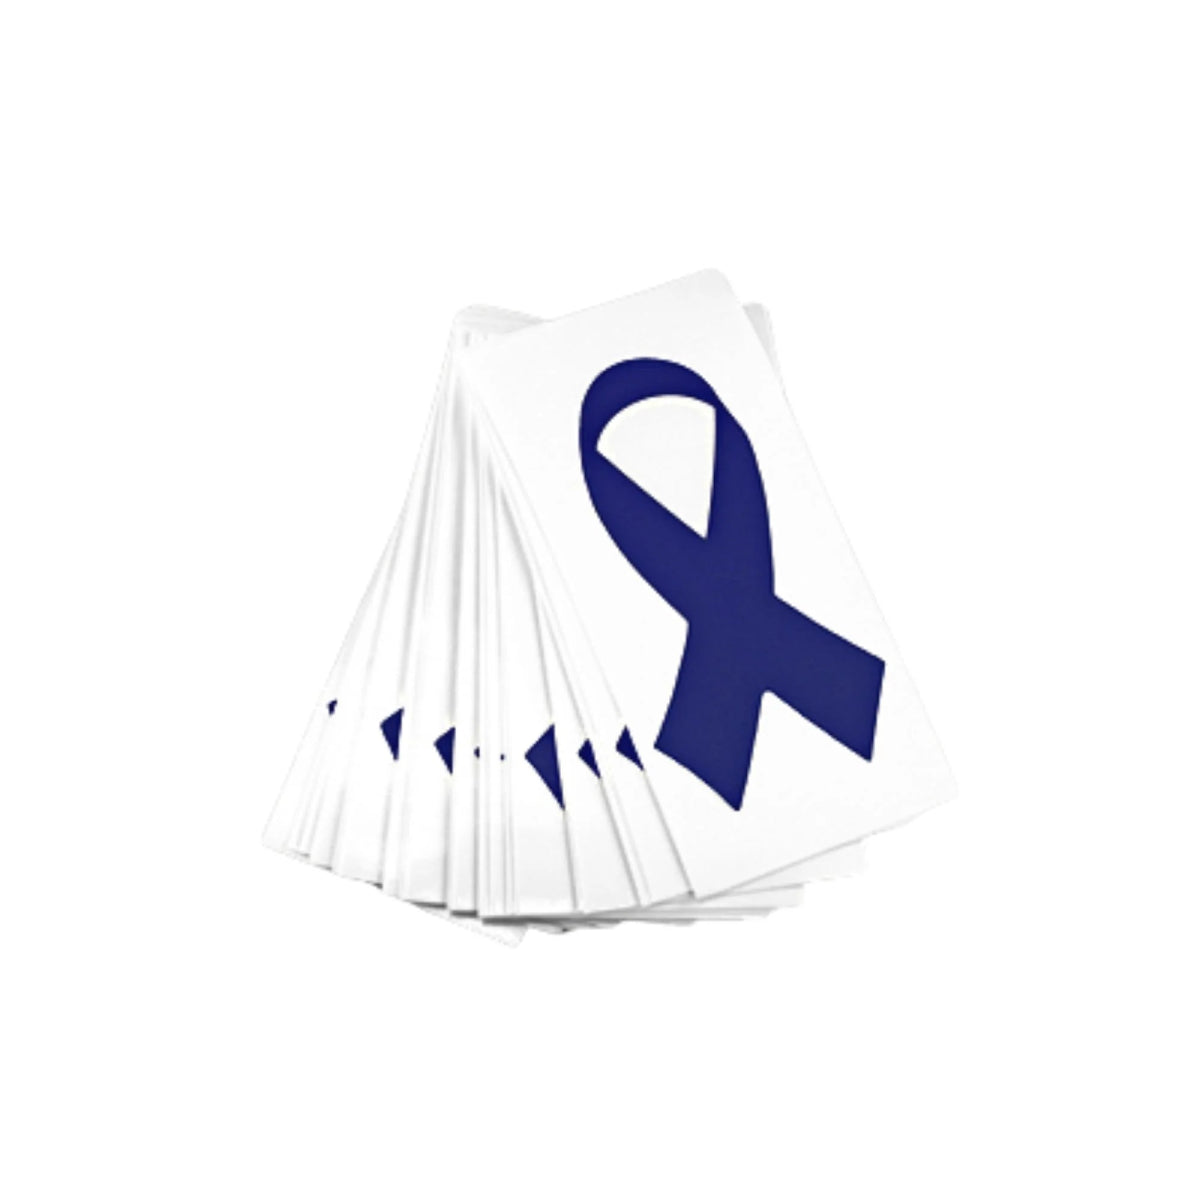 25 Small Dark Blue Ribbon Decals - Fundraising For A Cause